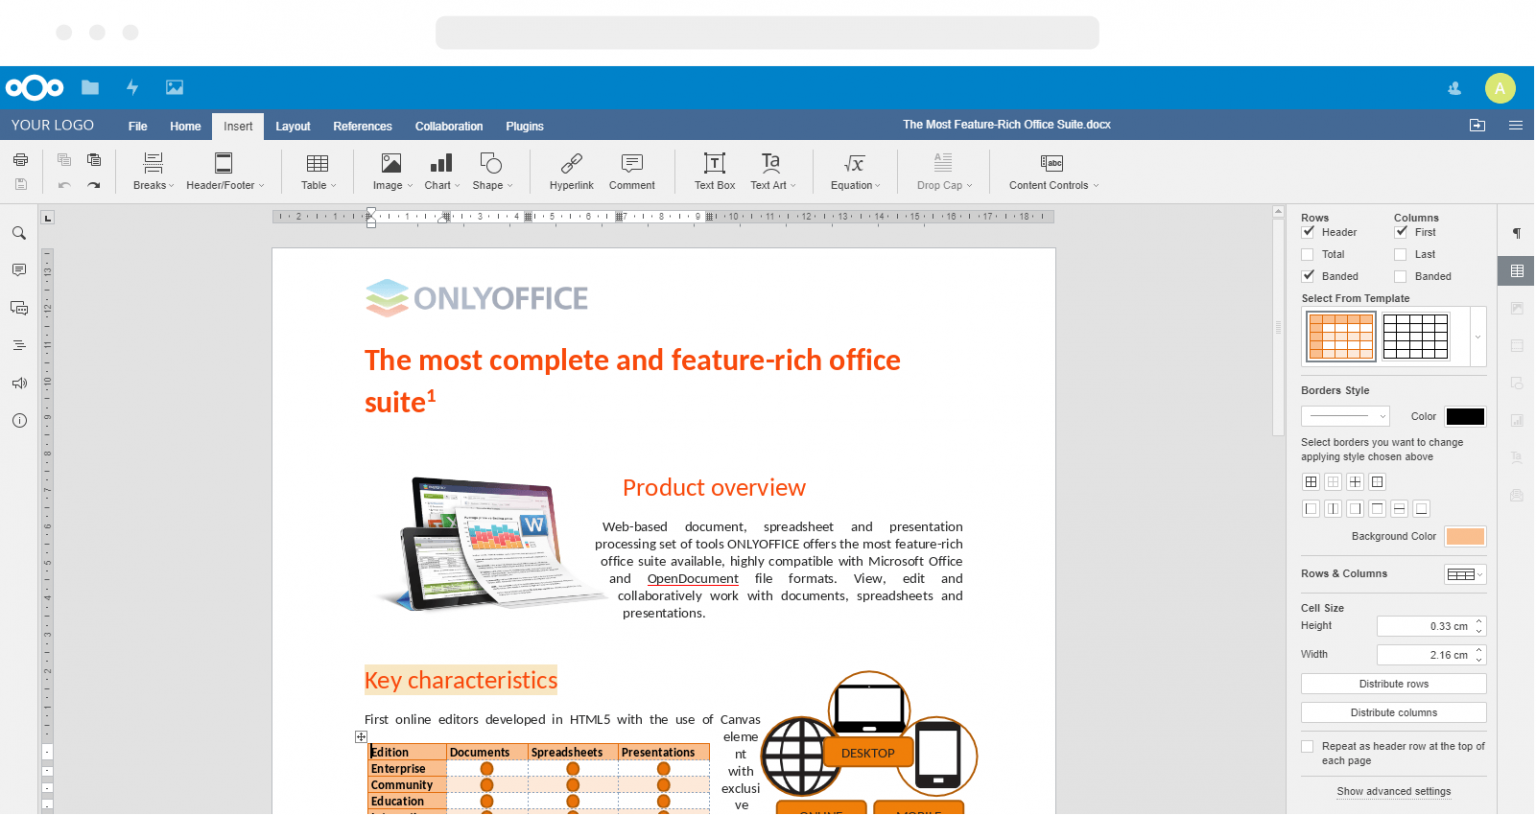 ONLYOFFICE 7.4.1.36 instal the last version for ios